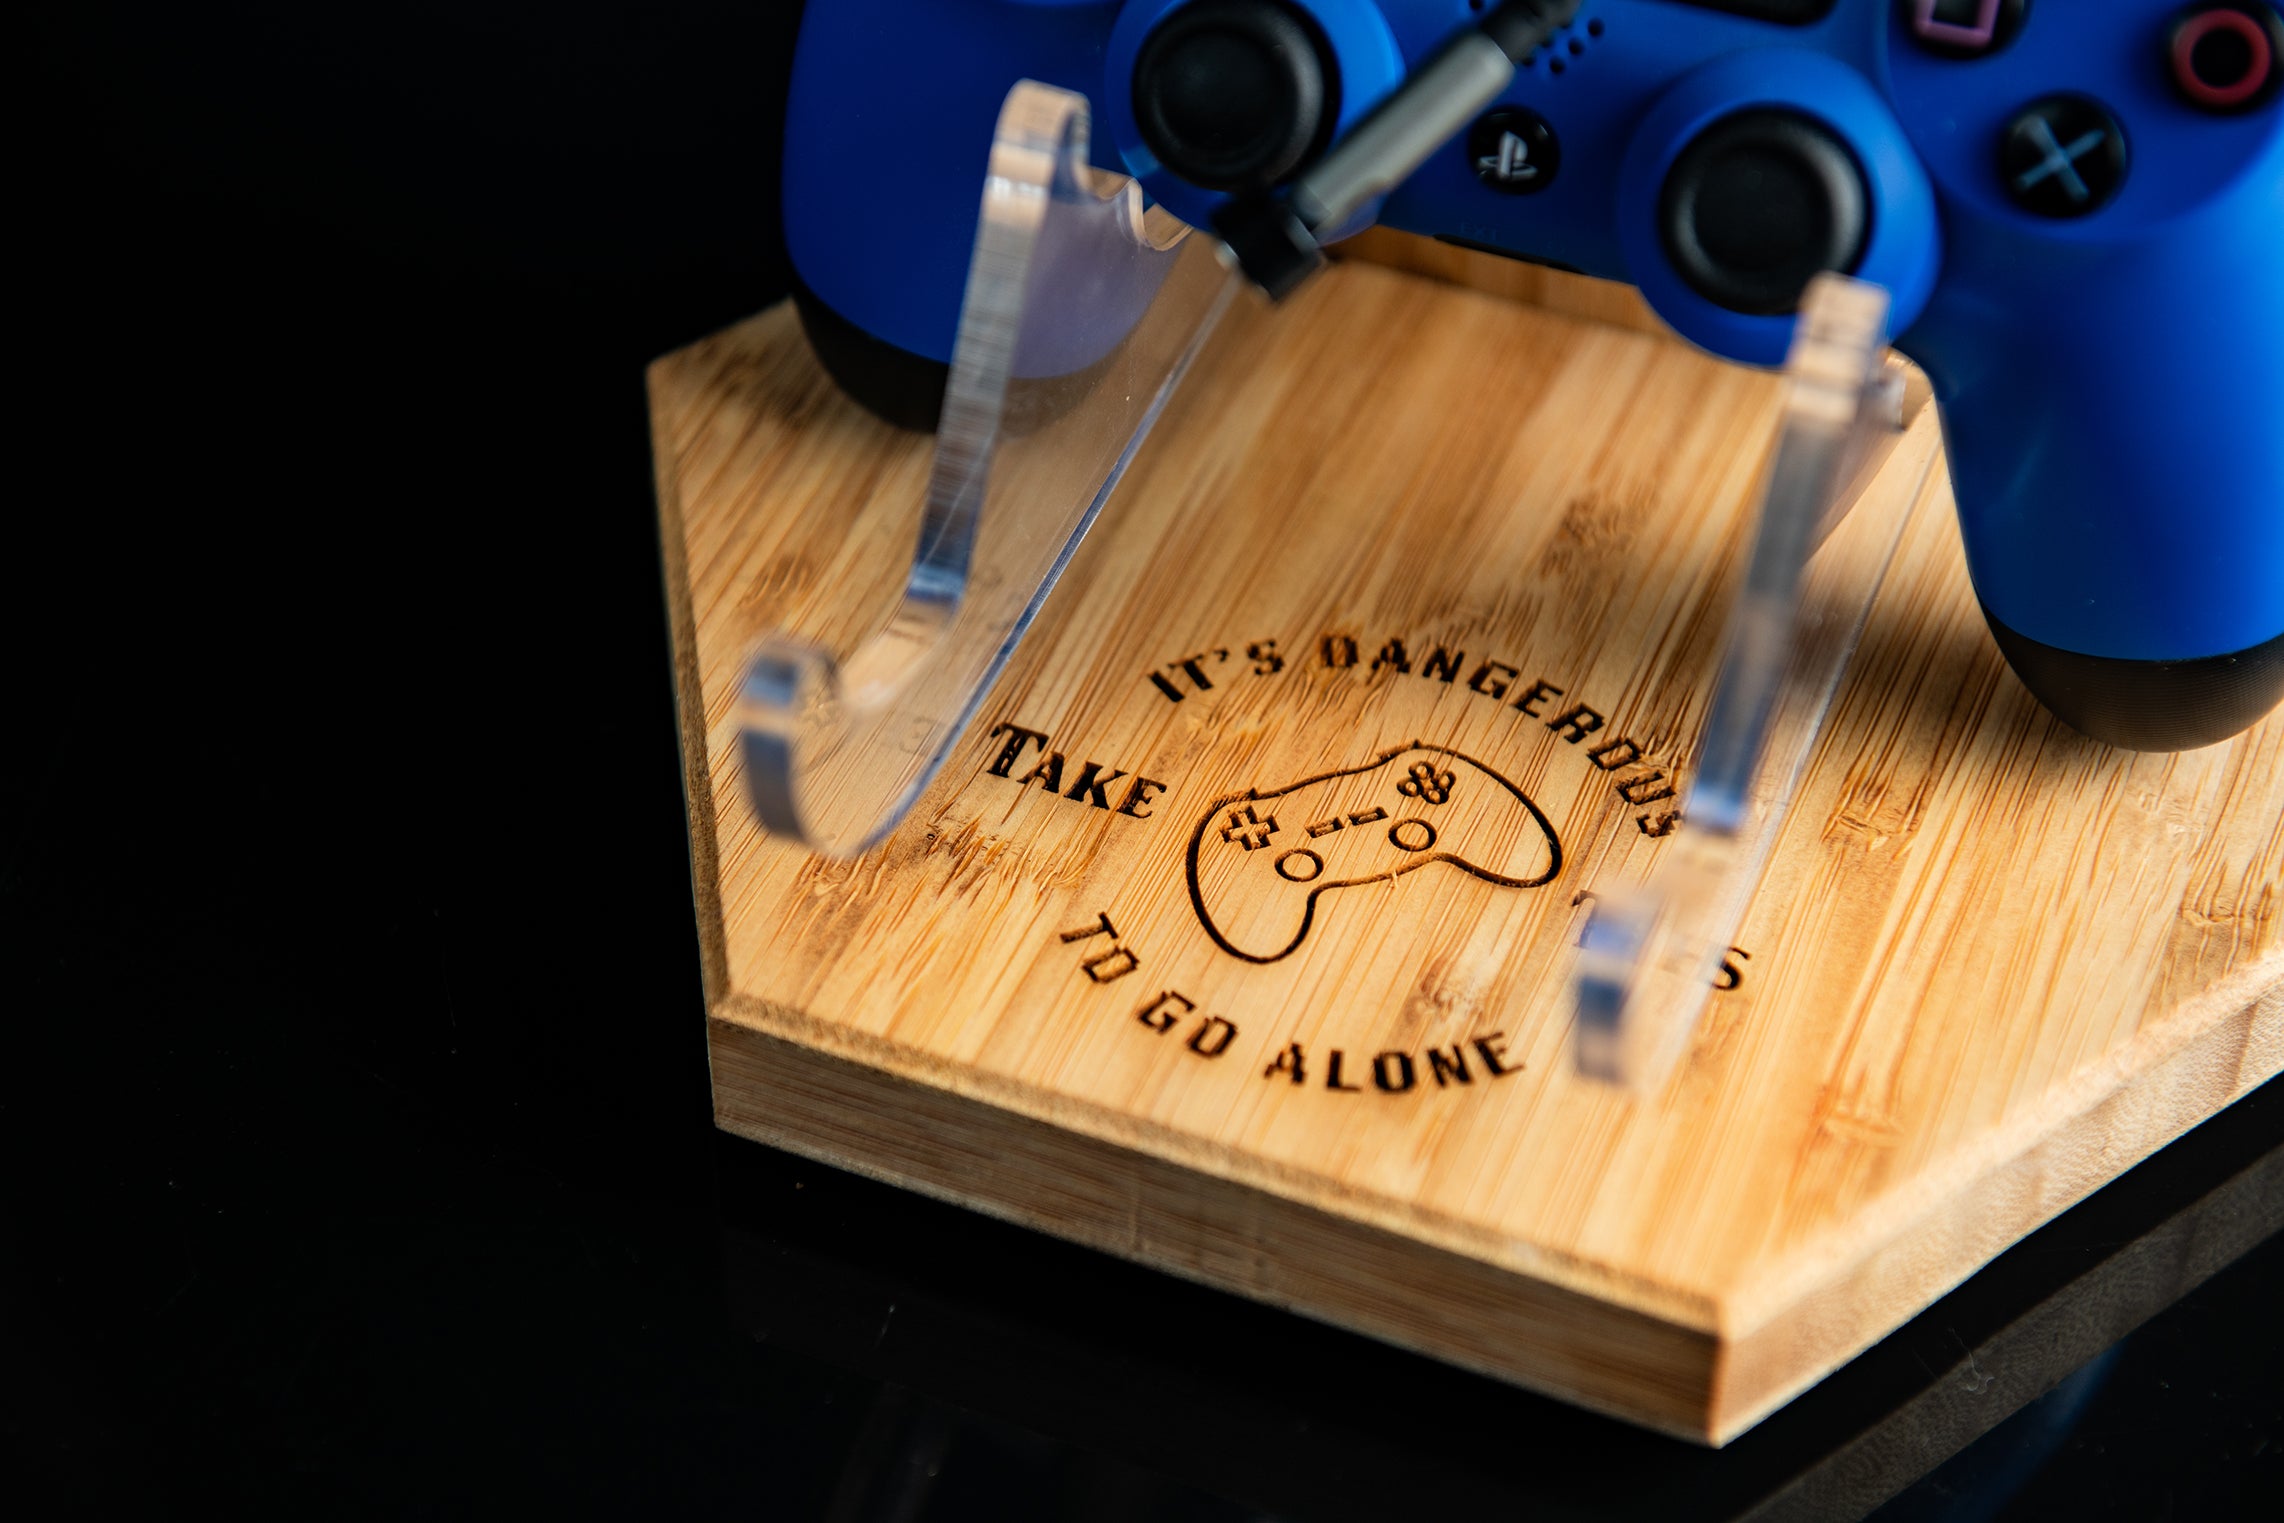 Personalized Controller Home Base Wall Mount for Gaming